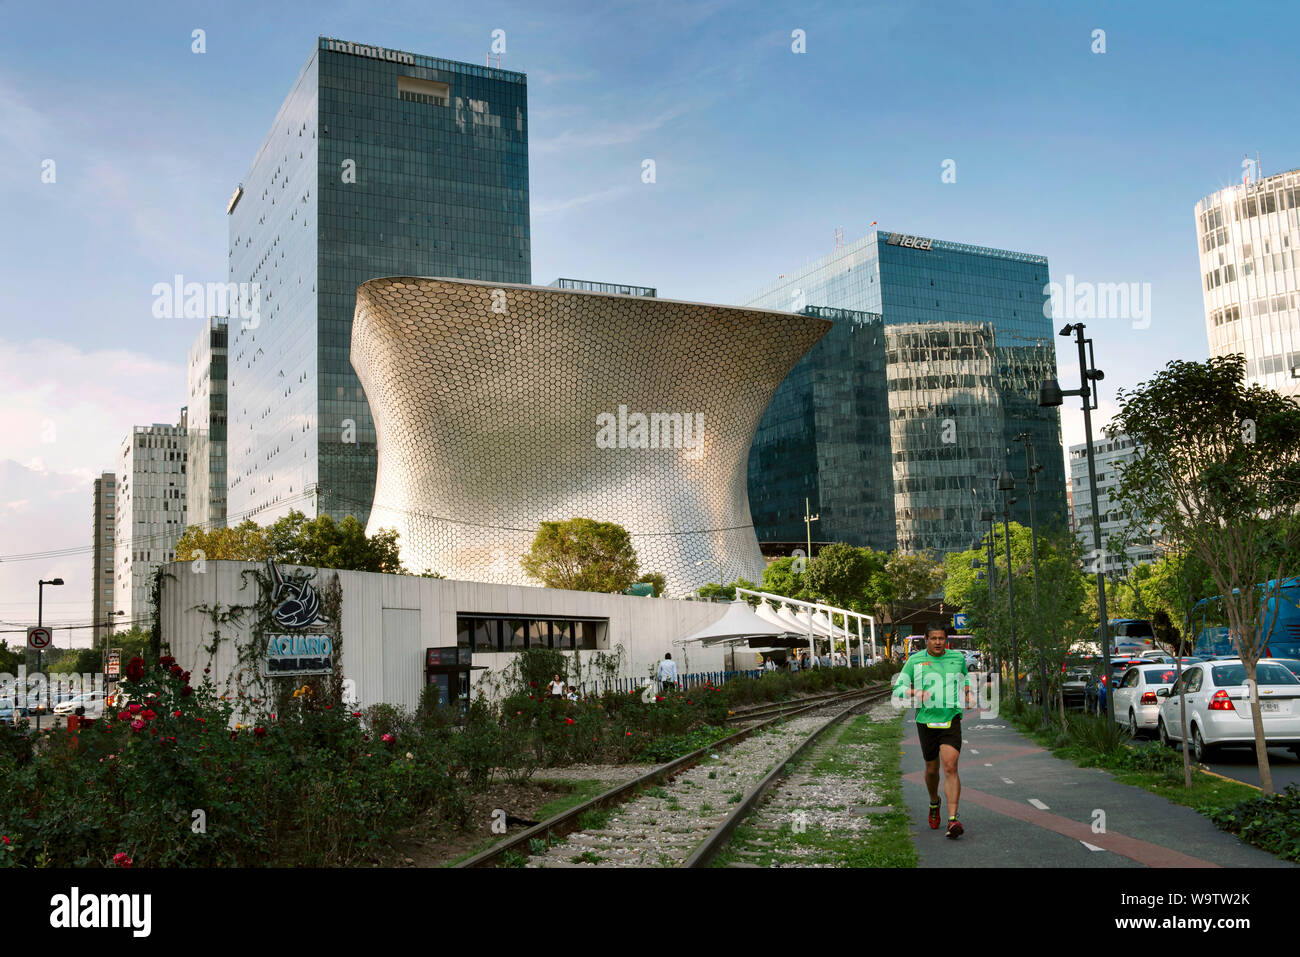 Man jogging, taking a break from the office in Polanco district. Soumaya Museum and bank buildings in the background. Mexico City, Mexico. Jun 2019 Stock Photo